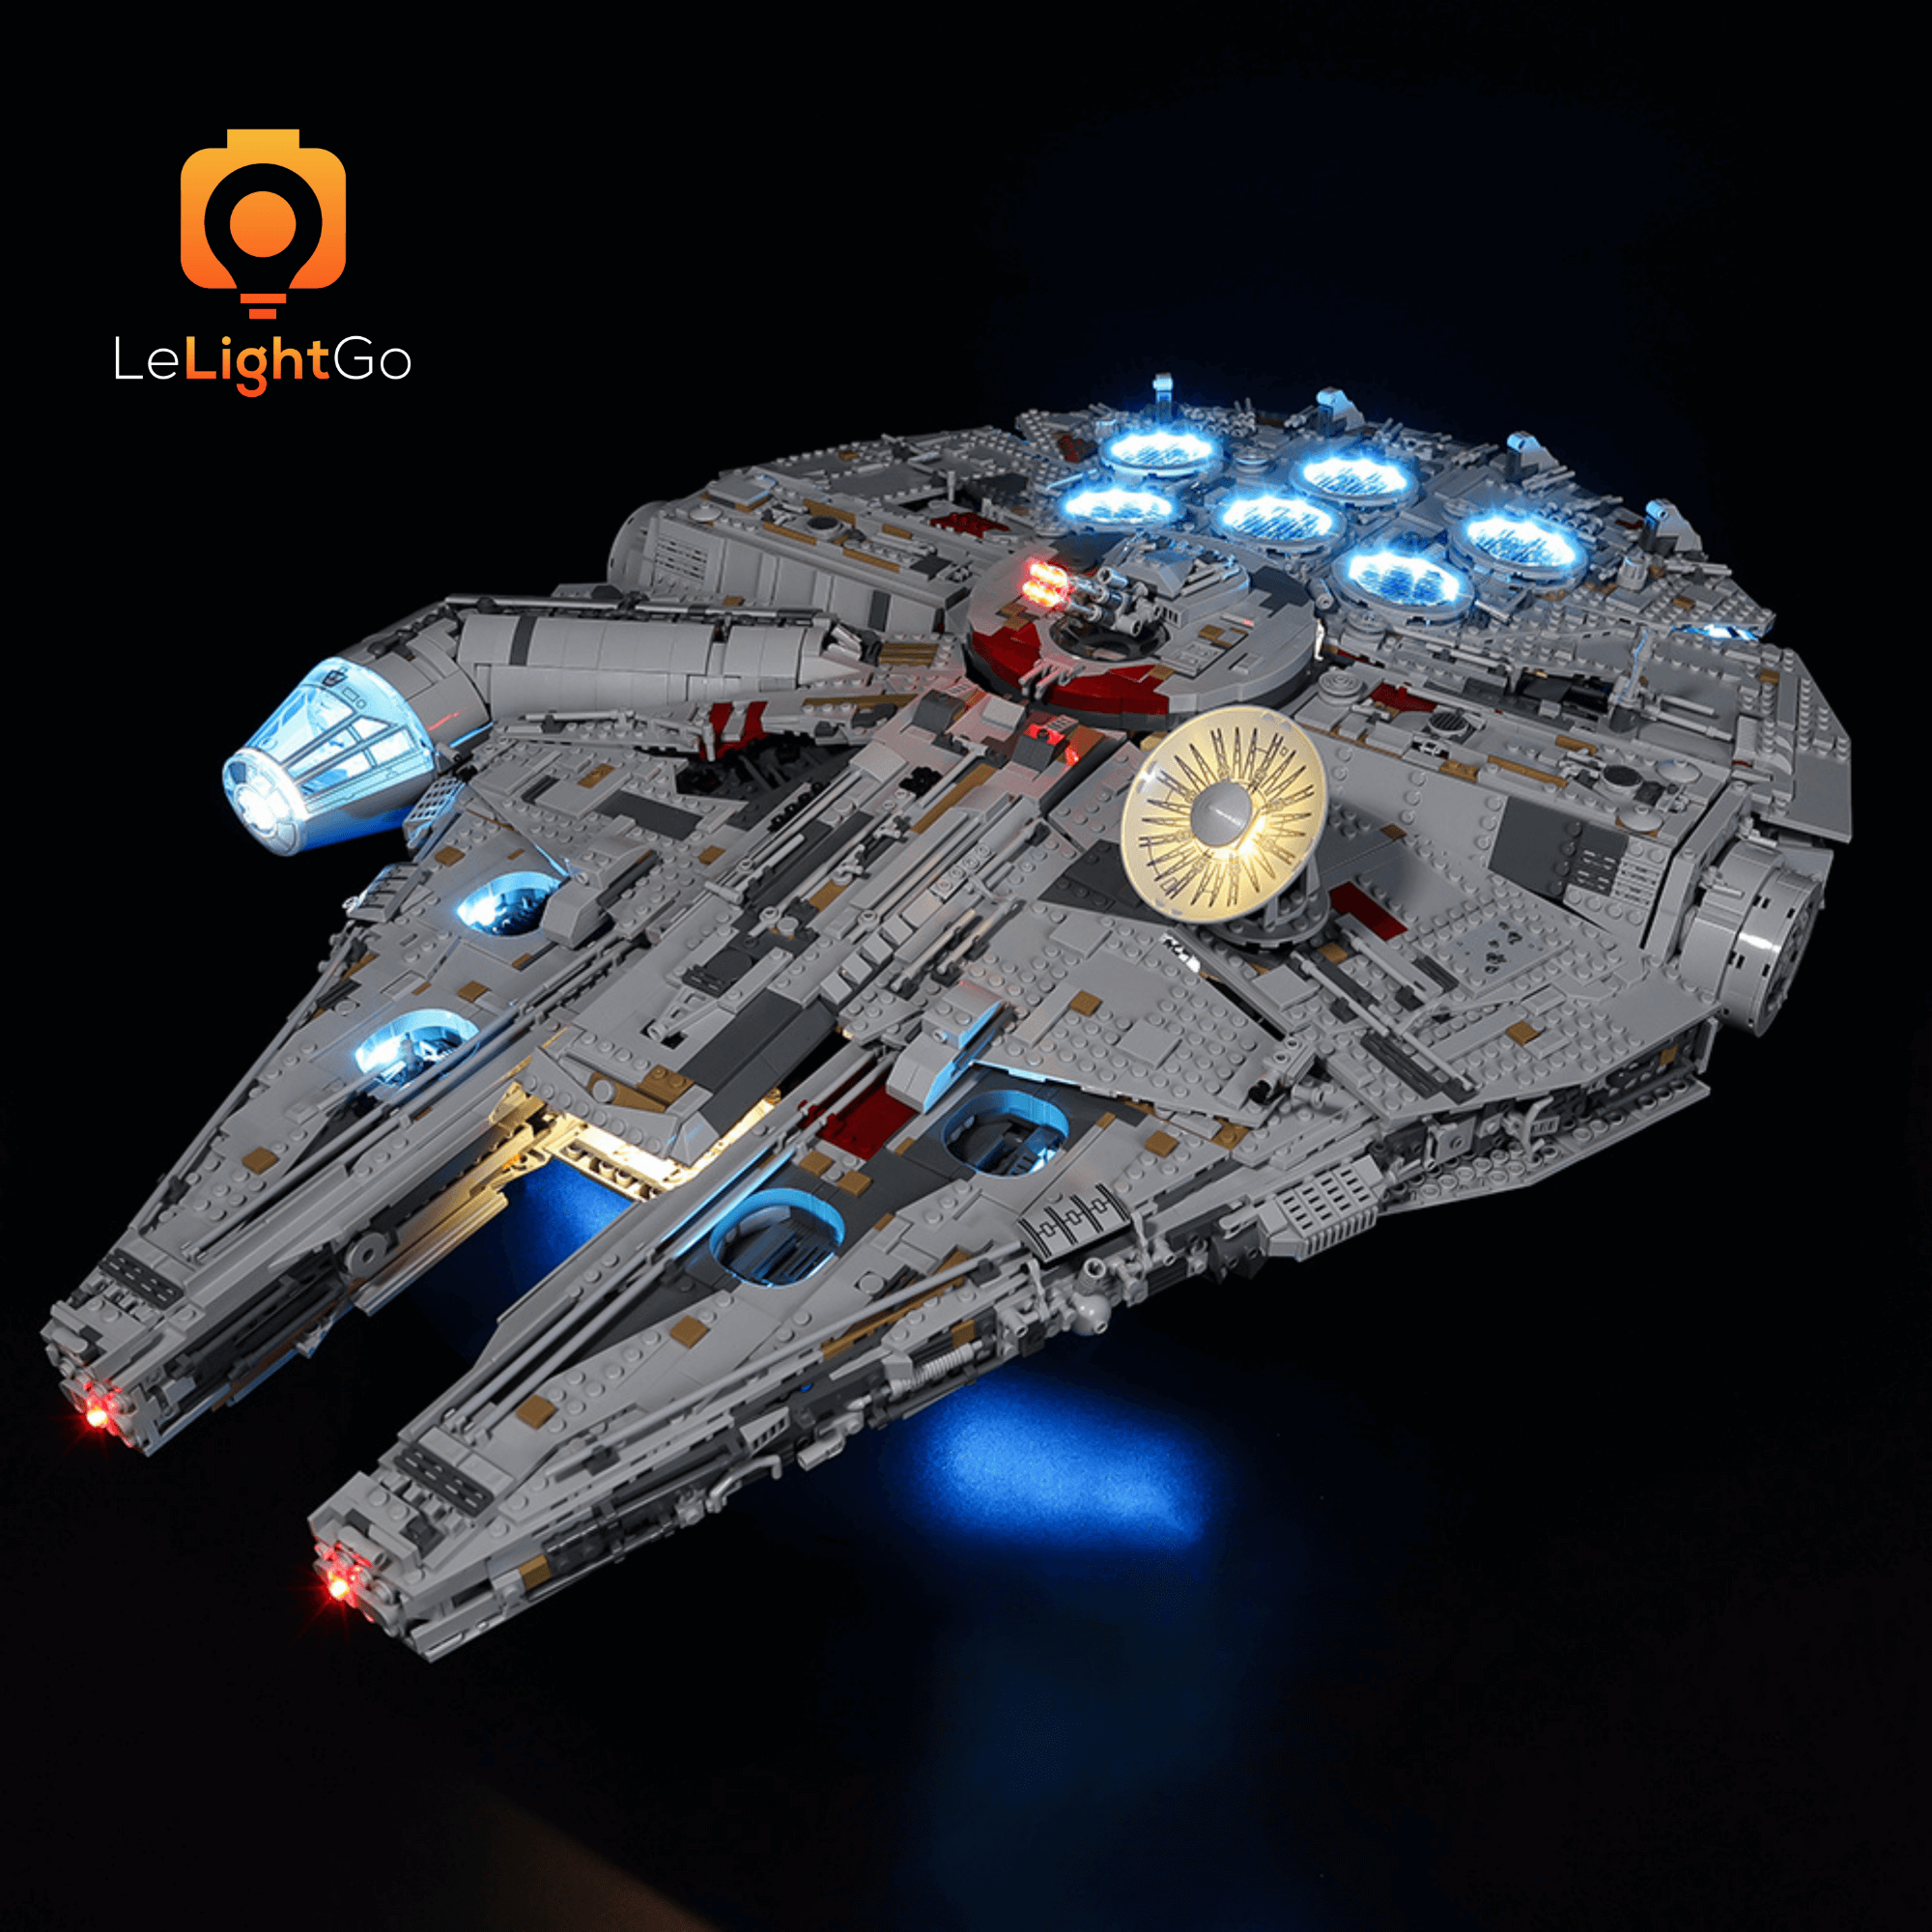 LEGO is for big kids too. Especially the LEGO 75192 UCS Millennium